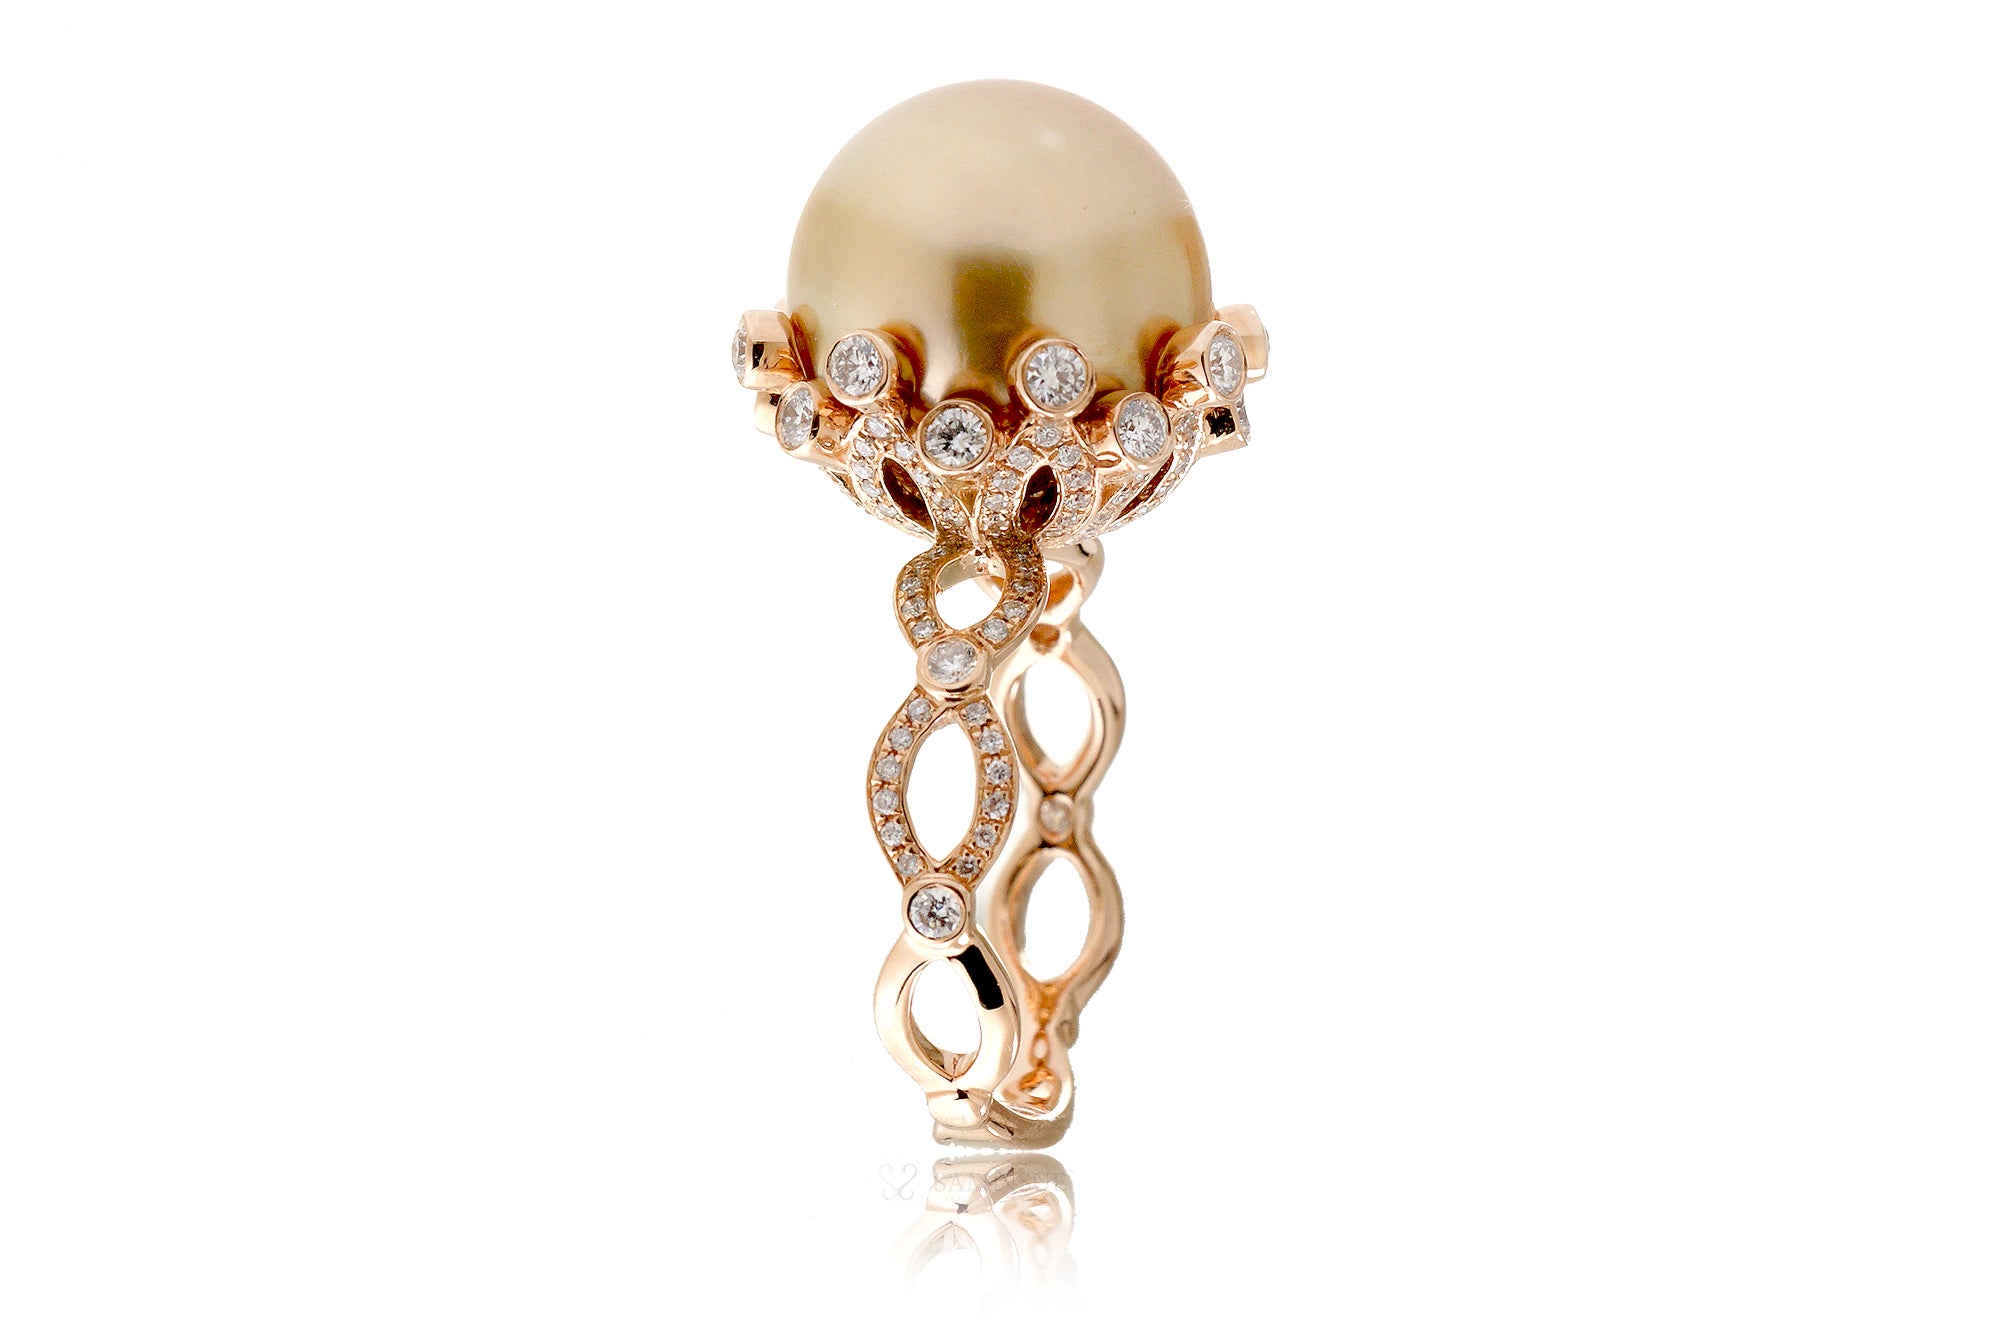 The Quince Golden Pearl Diamond Ring (13.1 mm)